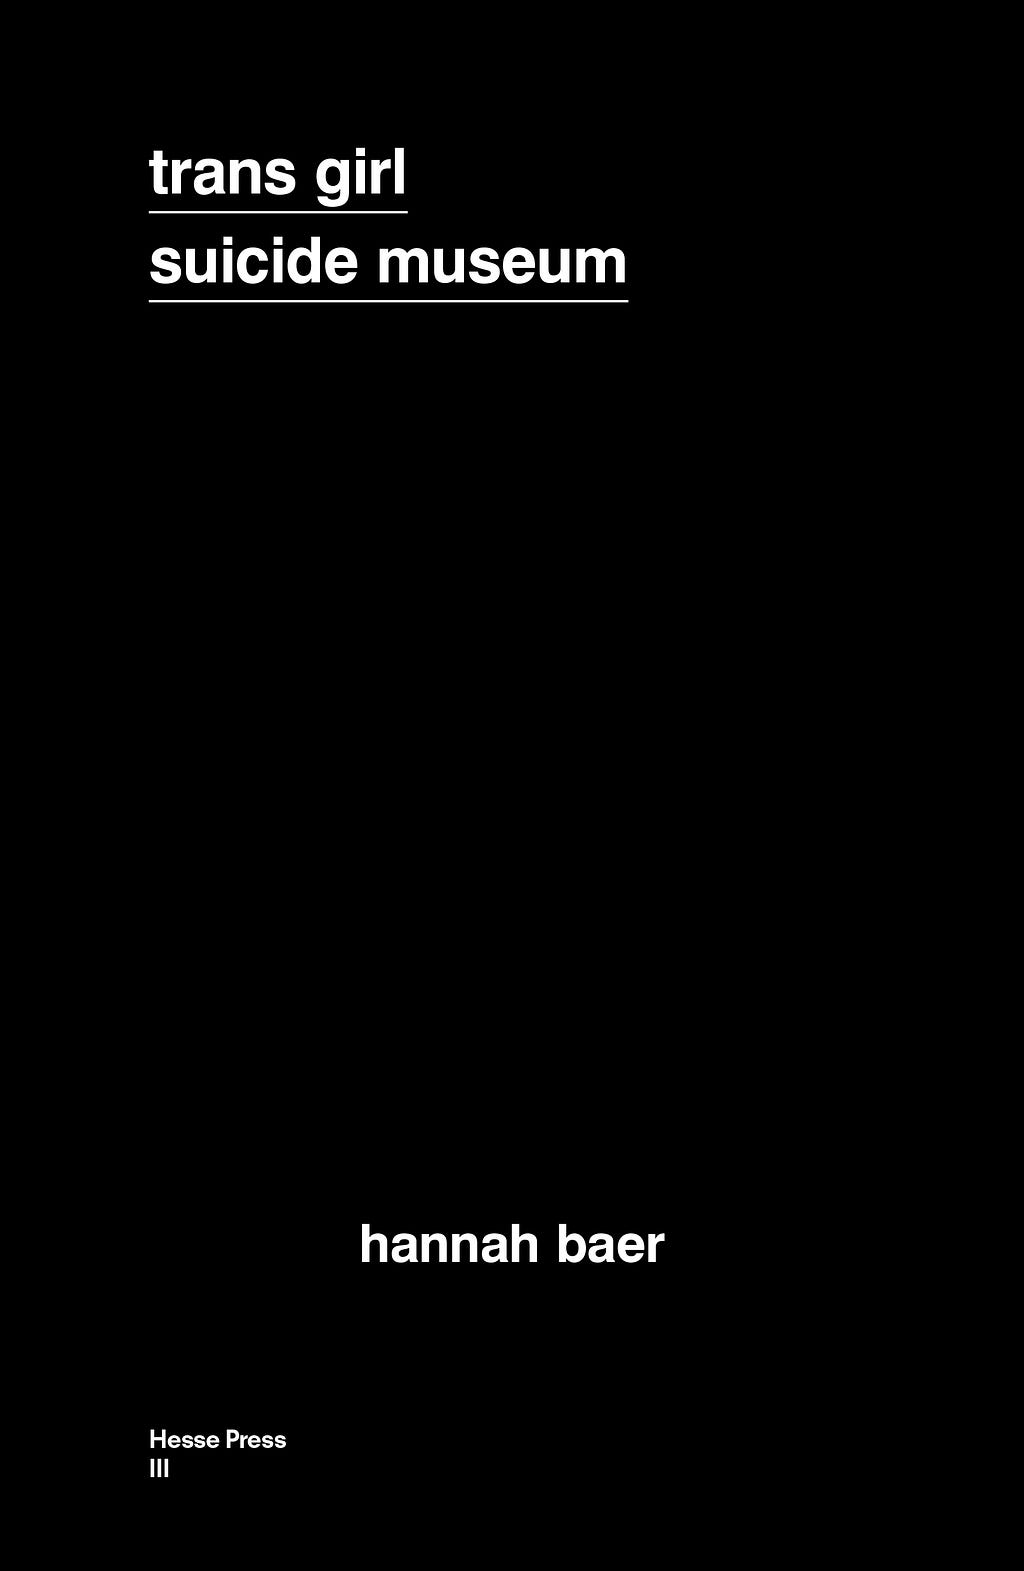 The cover of Hannah Baer’s book TRANS GIRL SUICIDE MUSEUM.